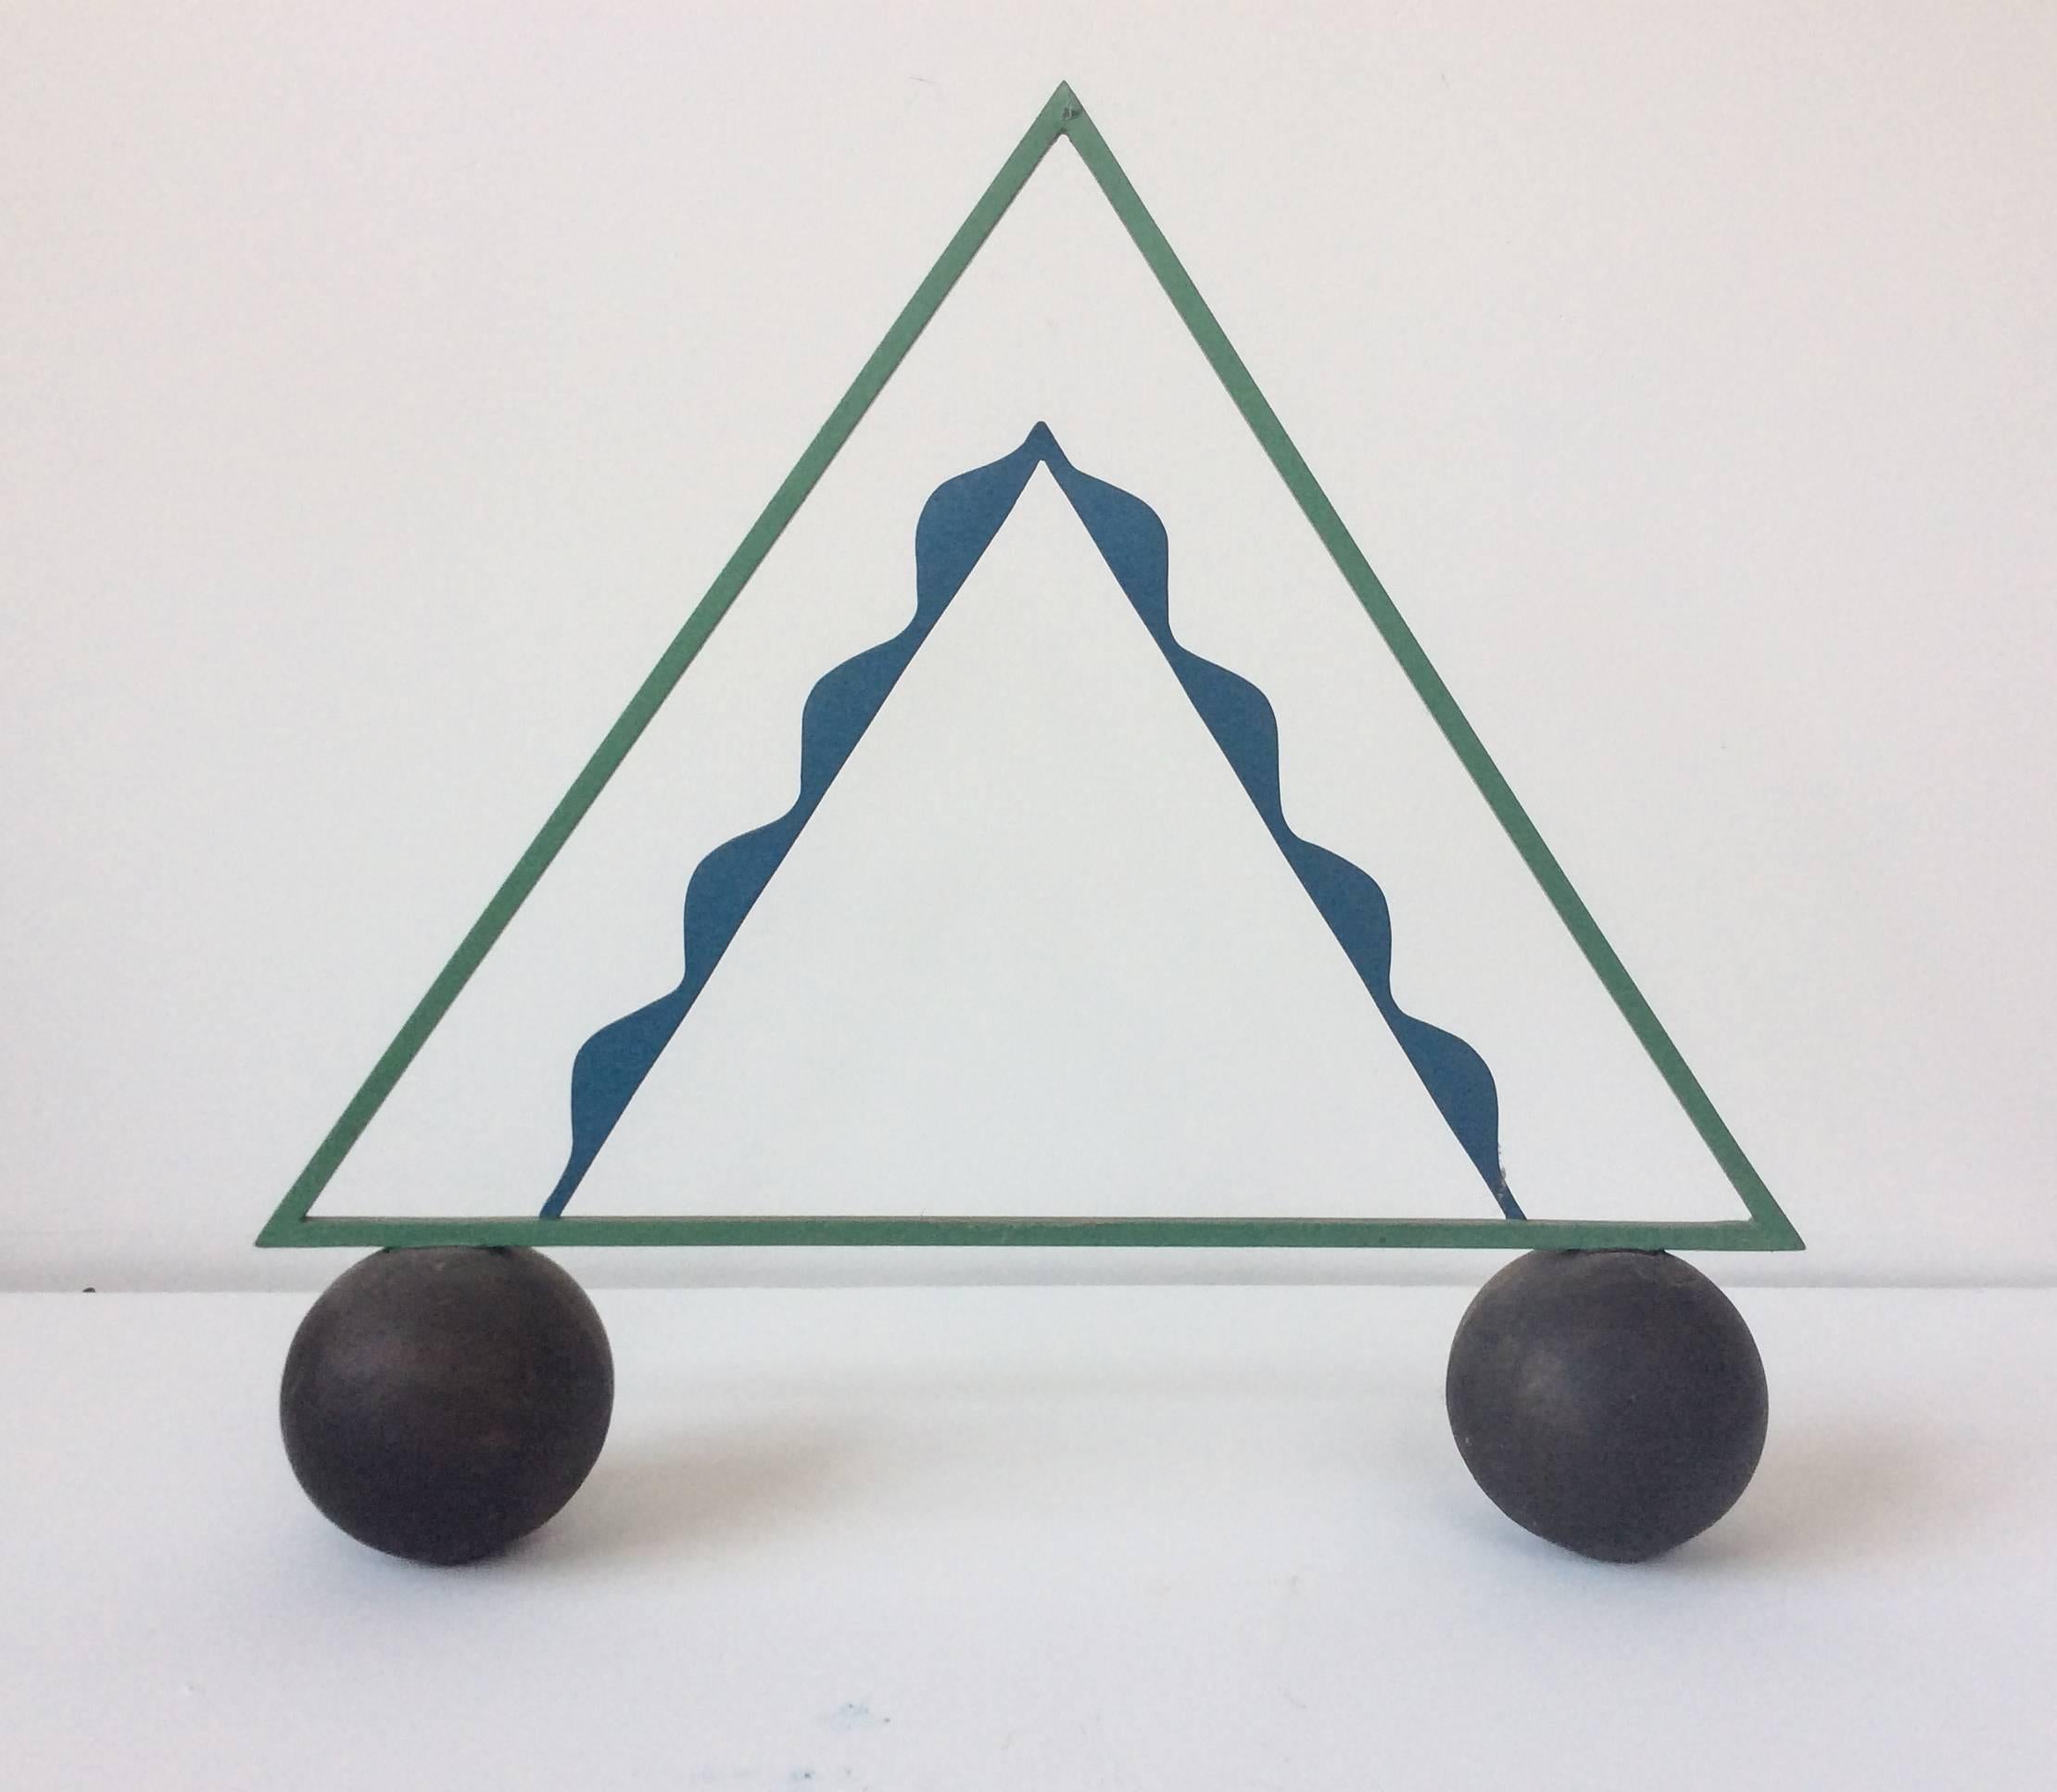 Leon Smith Abstract Sculpture - Big Top (Abstract Mid Century Modern Inspired Balancing Triangle Sculpture)